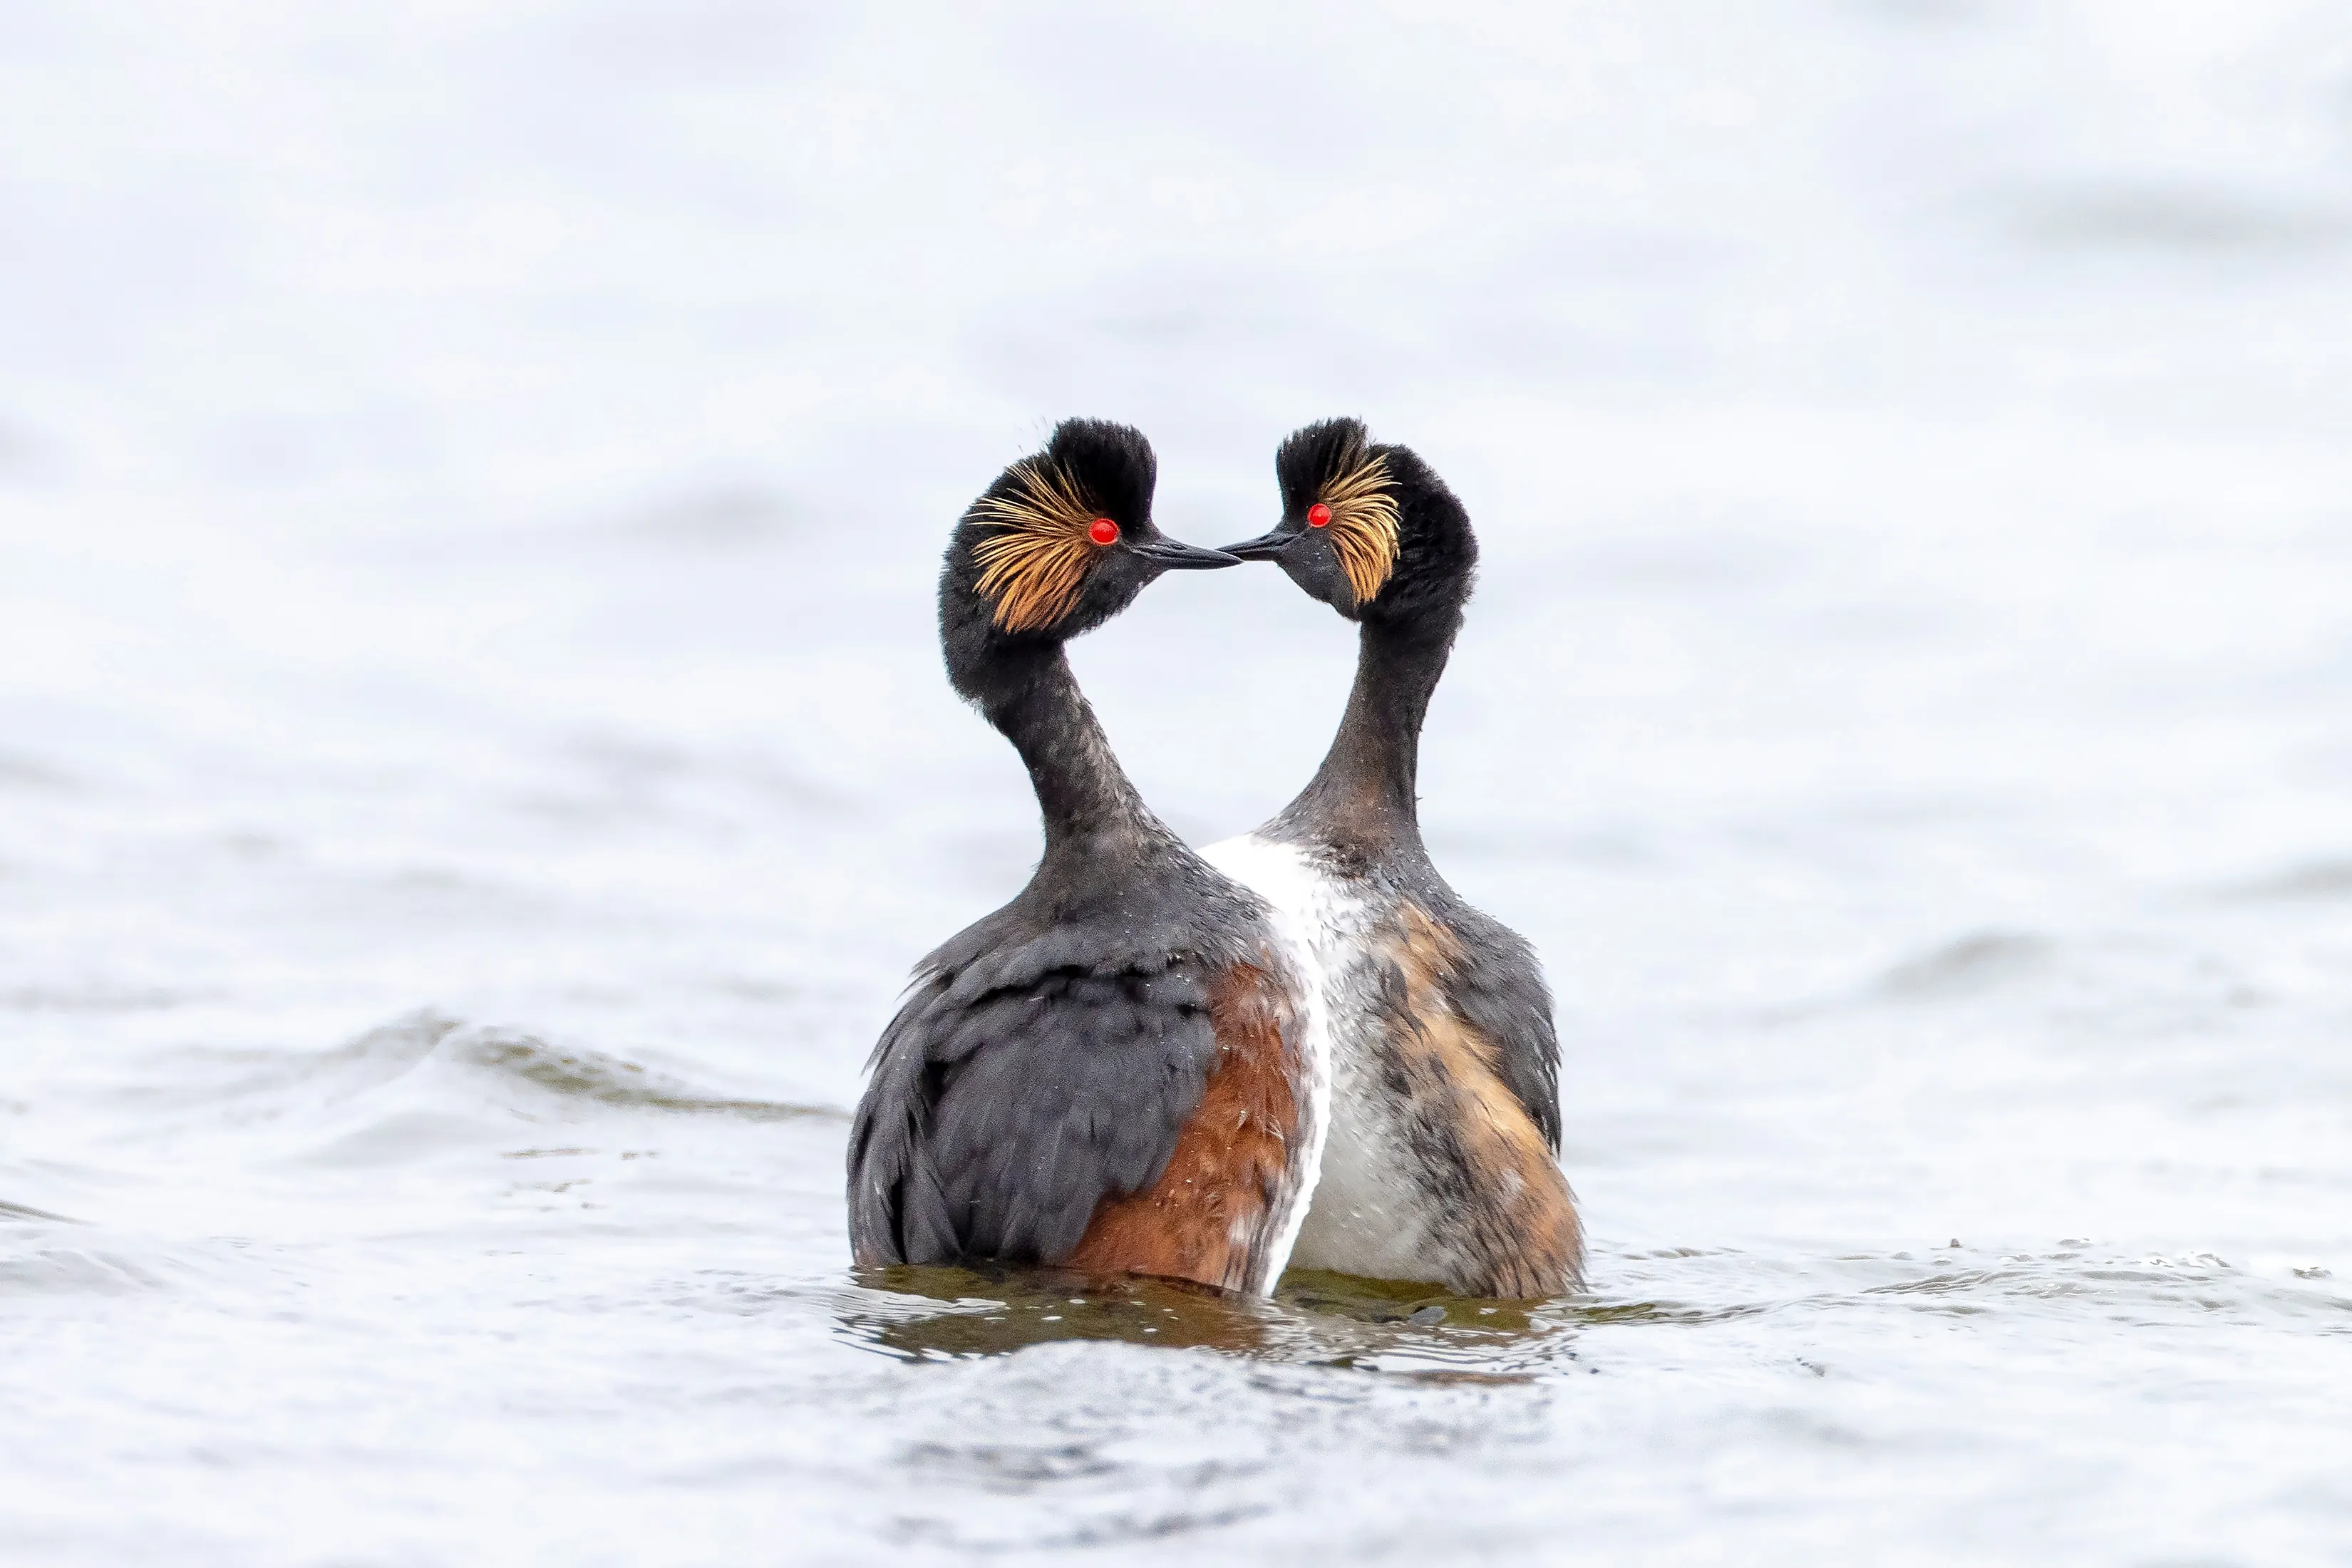 Black-necked Grebes courting in water.